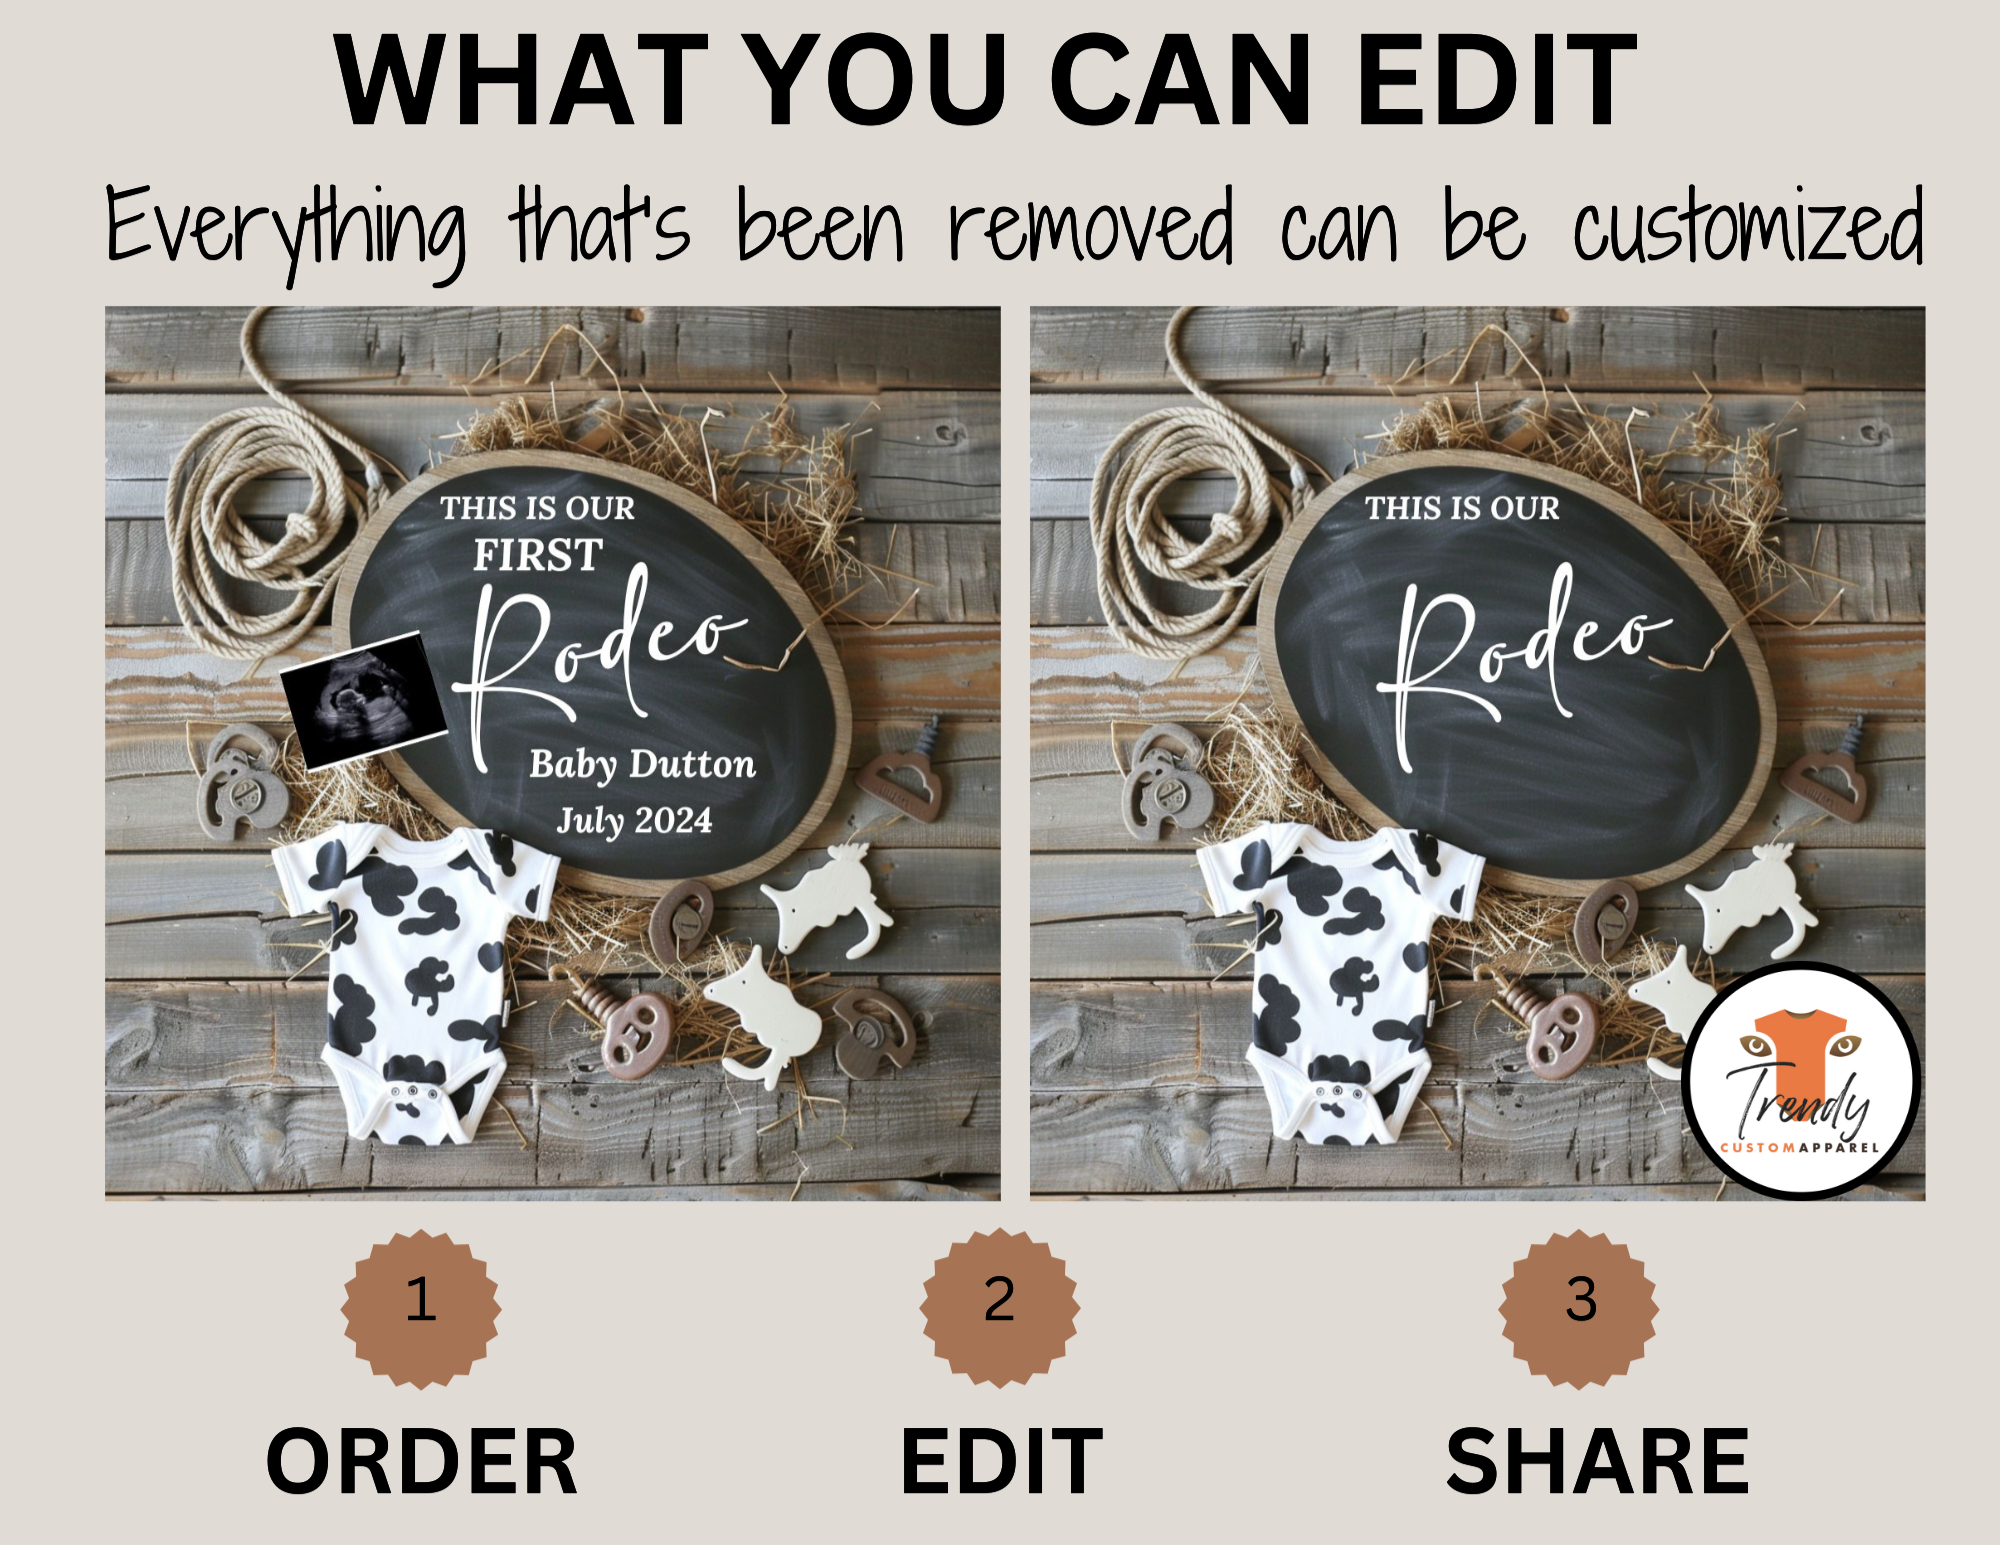 Digital Western Pregnancy Announcement, This is Our First Rodeo, Customizable Cowboy Themed, Personalized Editable Template